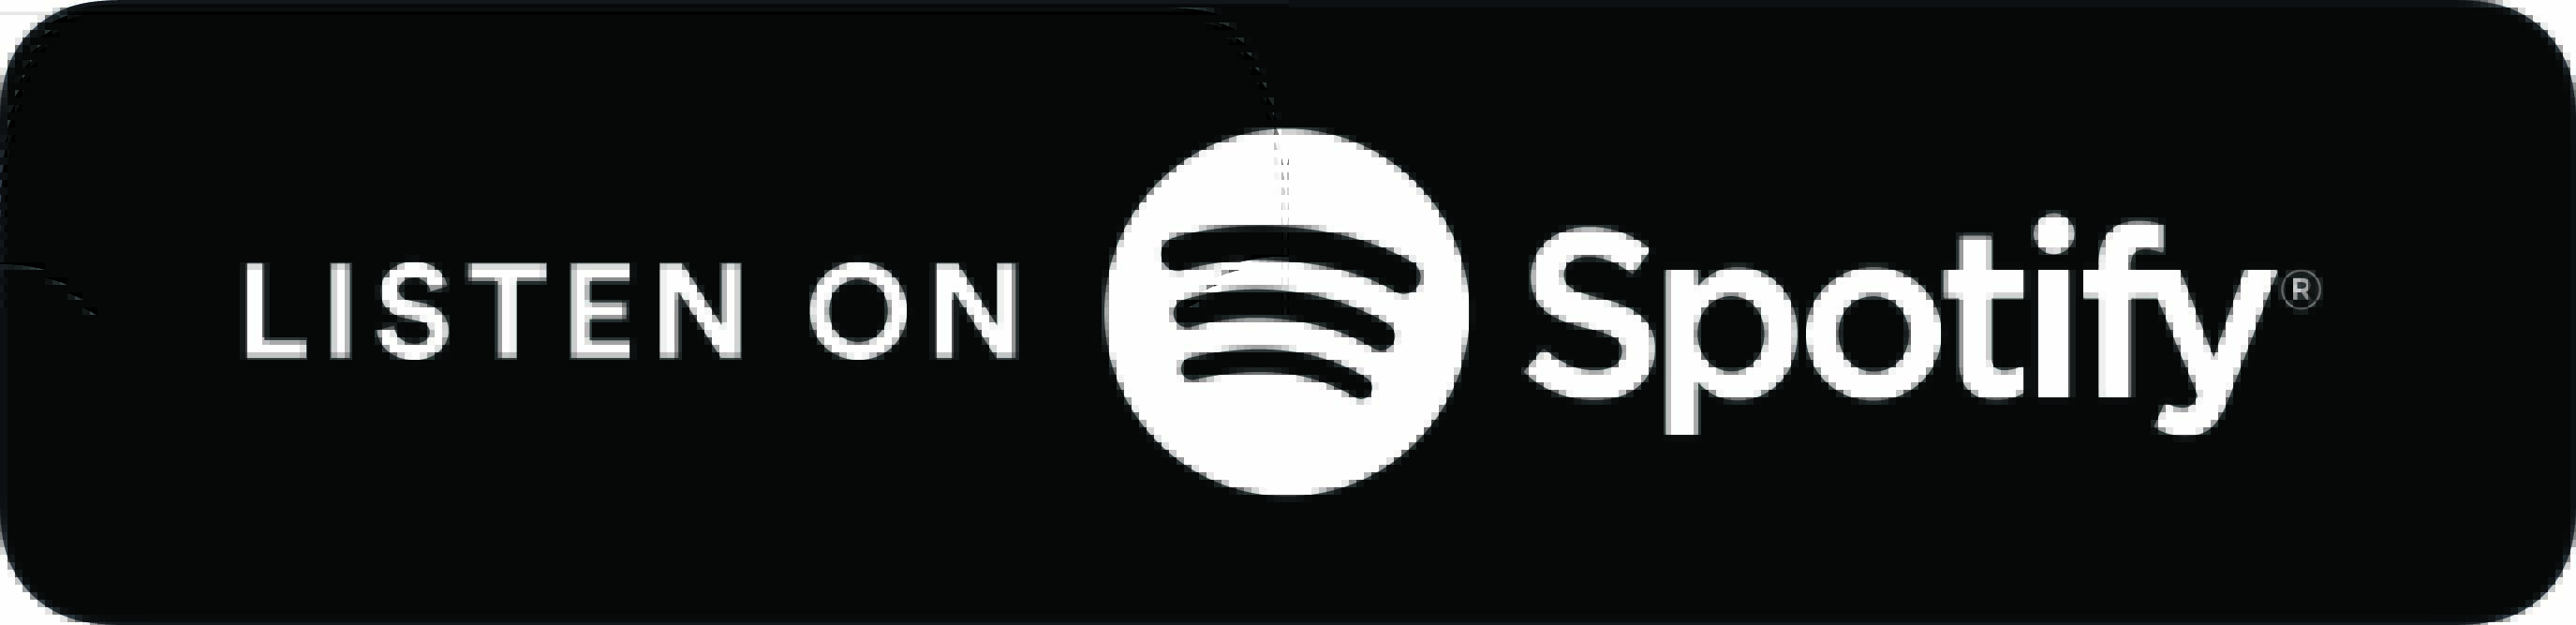 Liston to Stone World Podcasts on Spotify now!